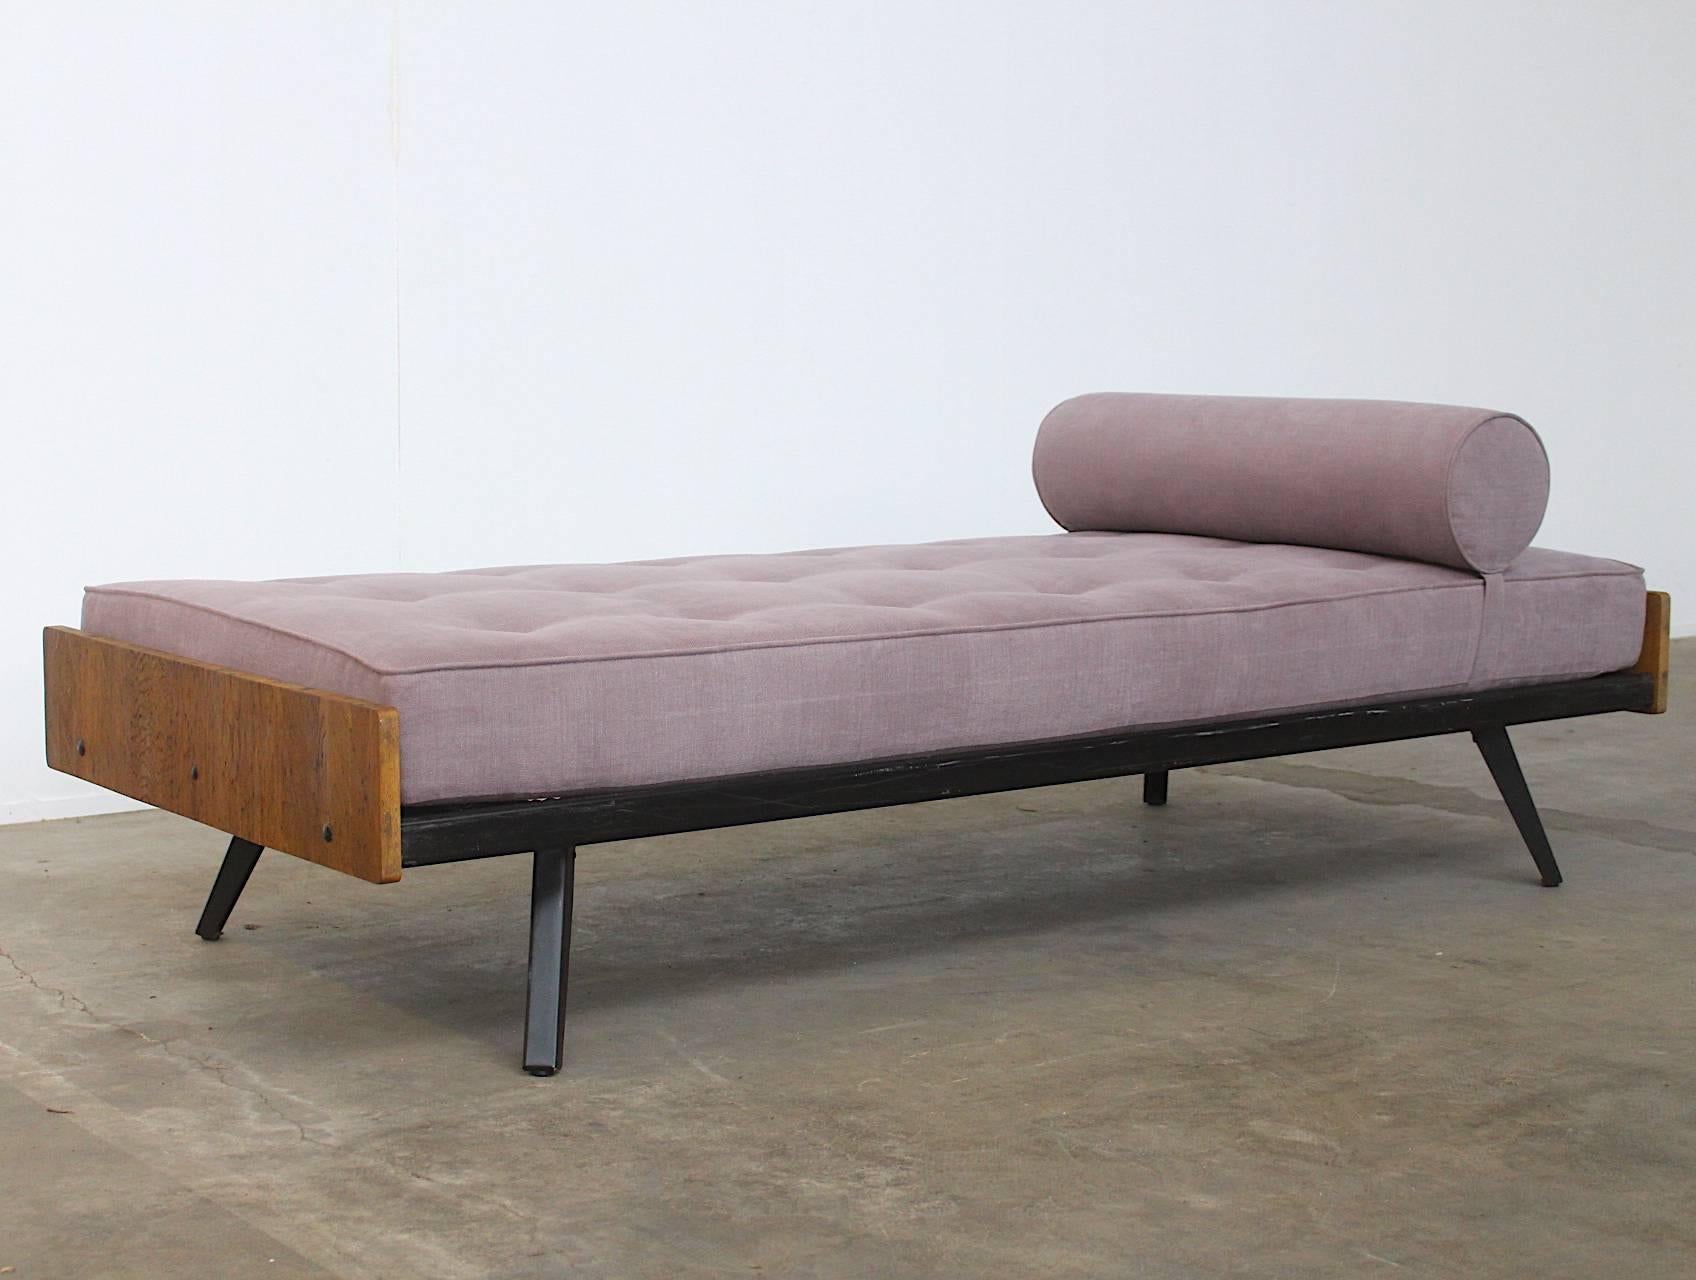 Steel French Jean Prouvé Style Daybed, circa 1950